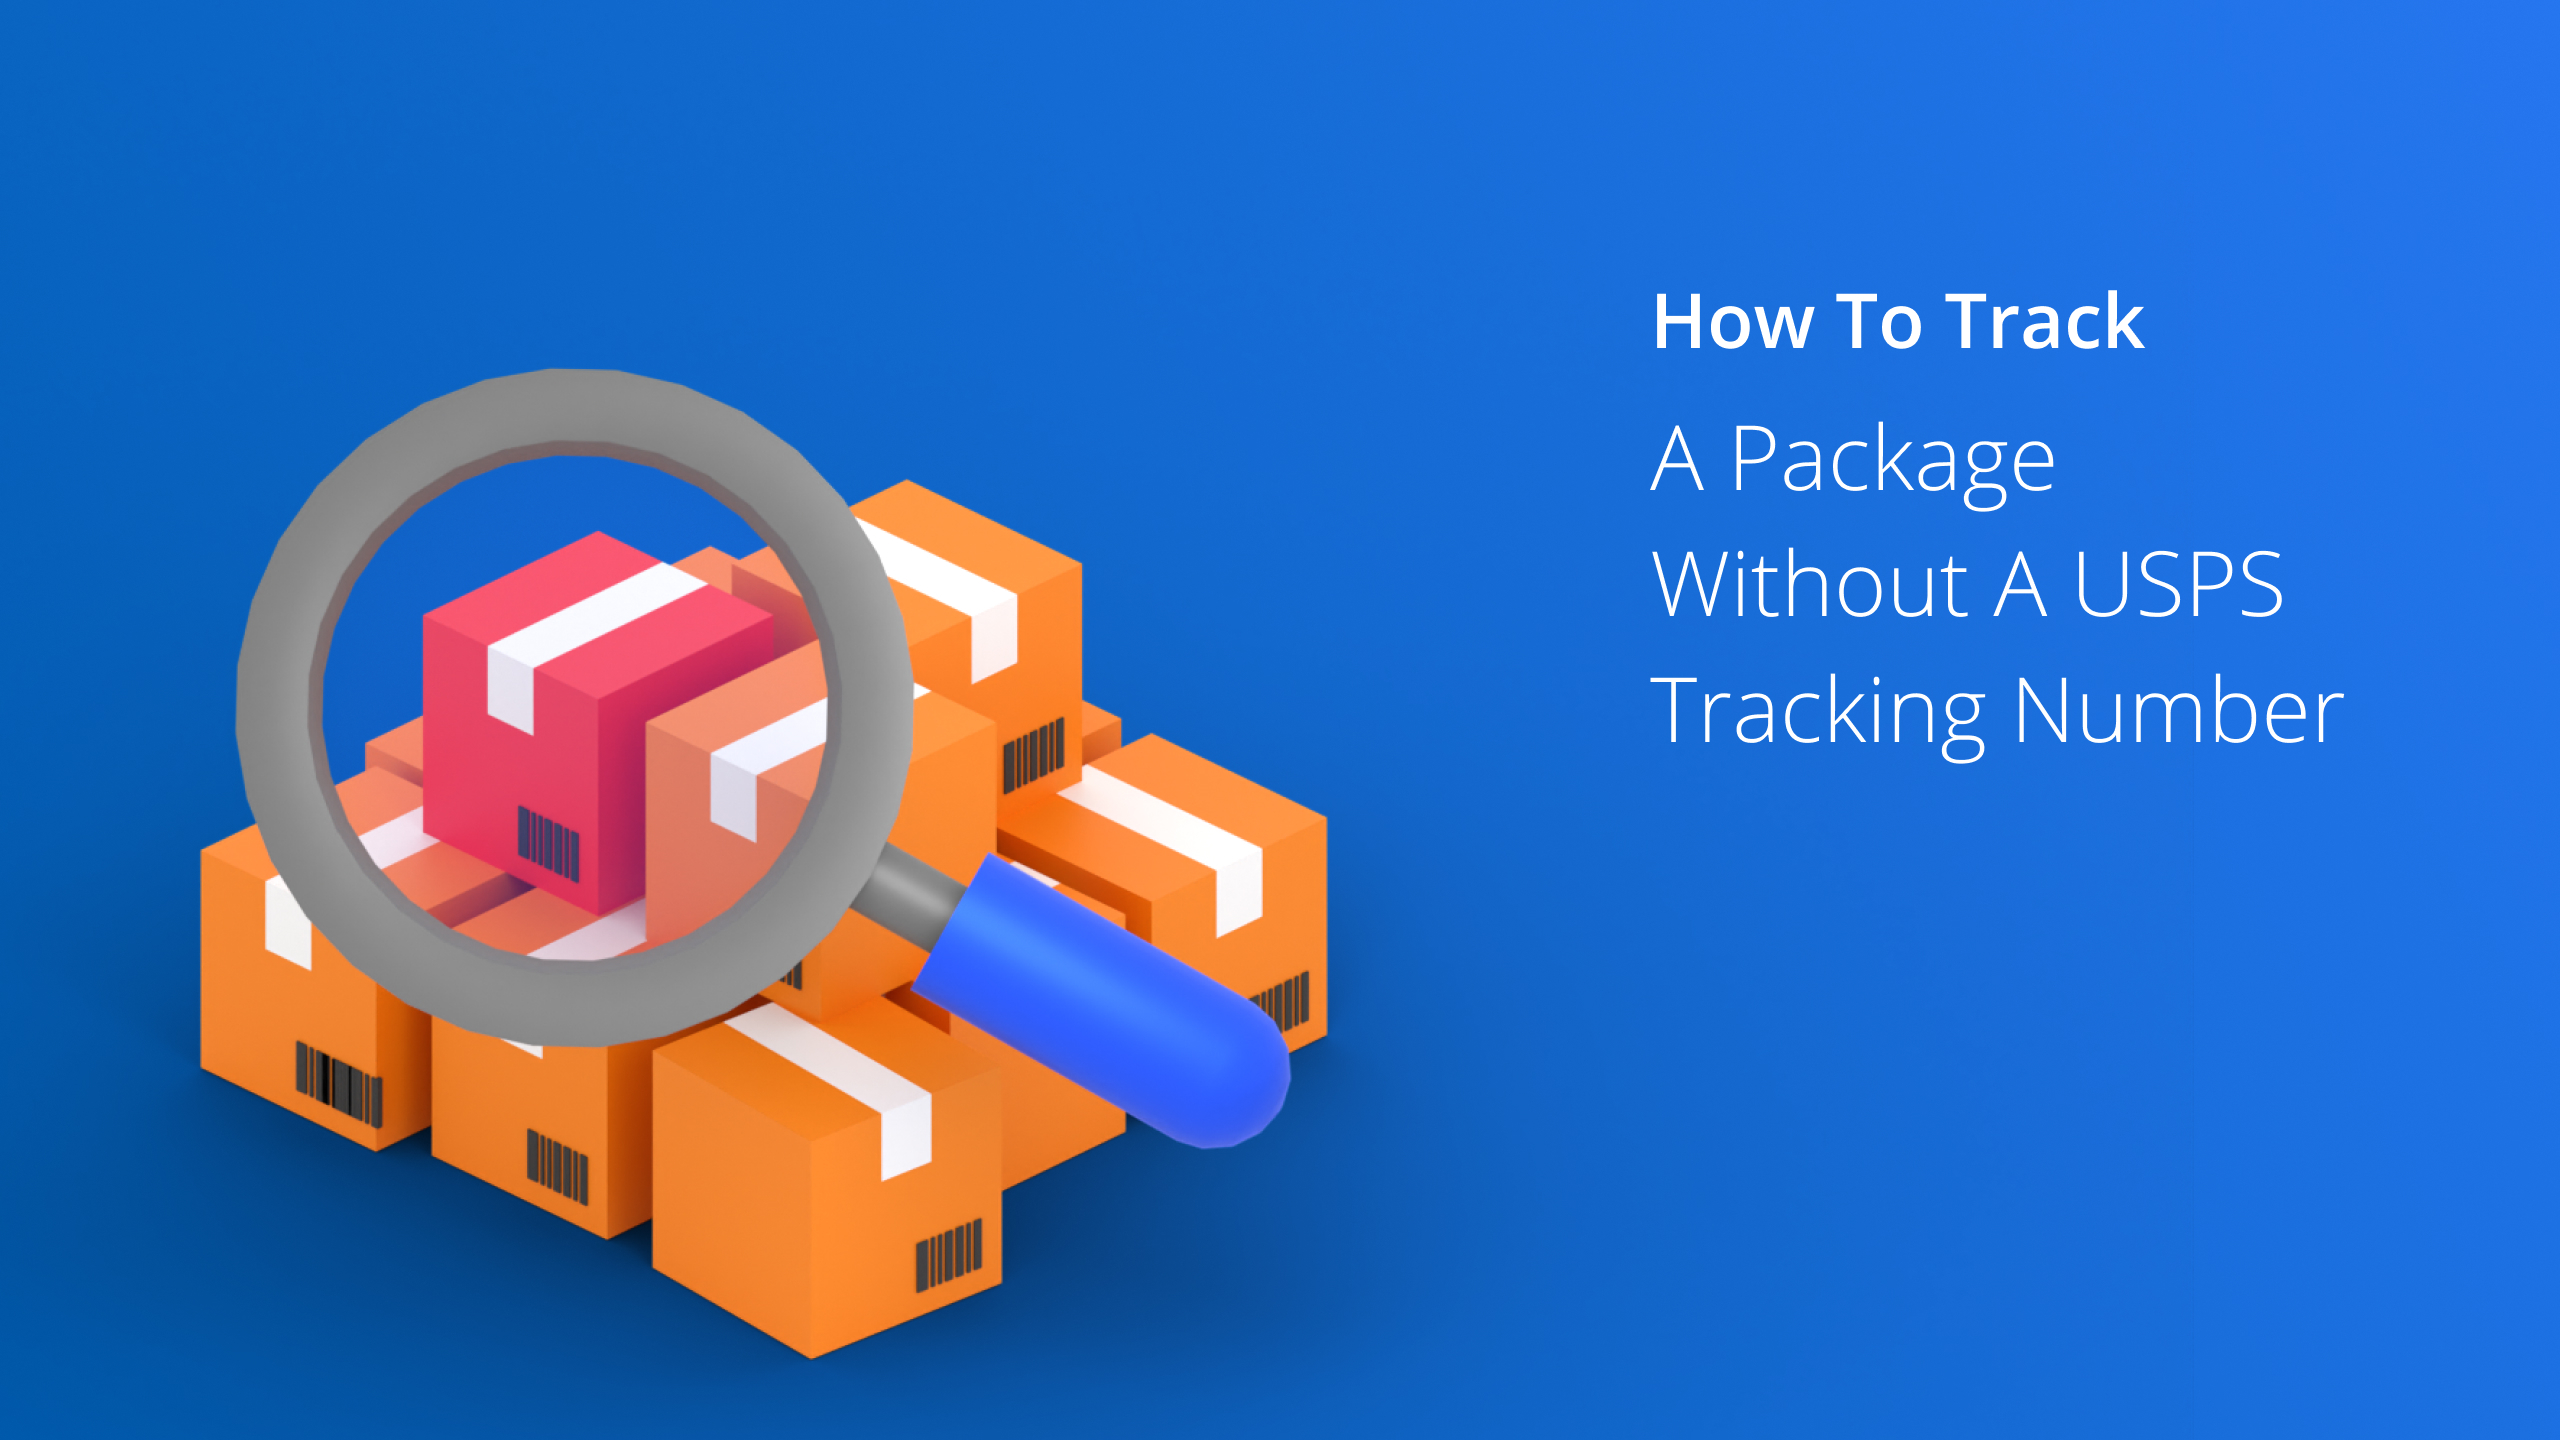 How To Track A Package Without A USPS Tracking Number